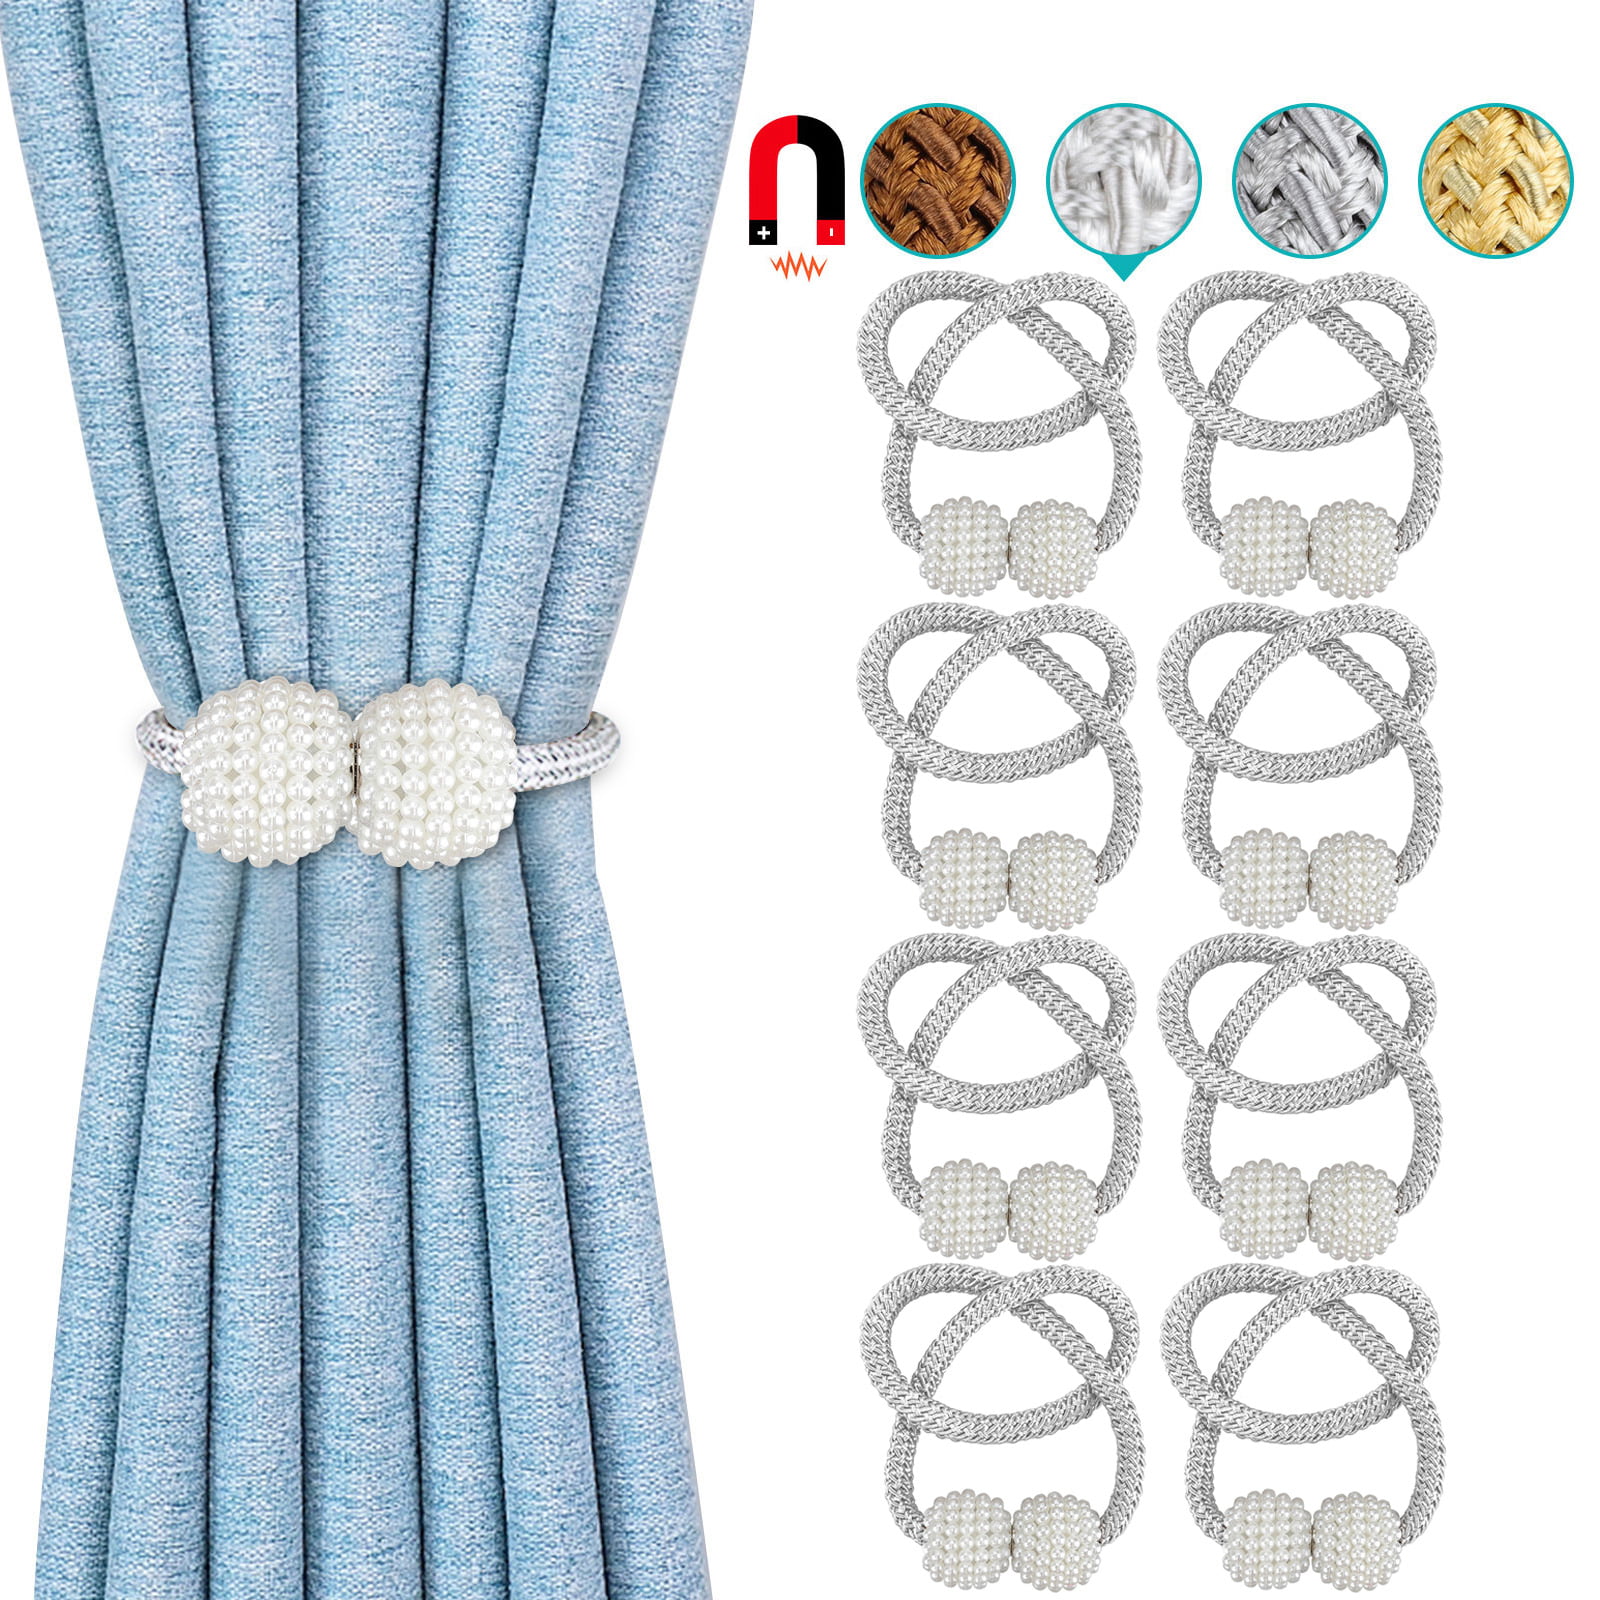 Teal LUYIMIN Magnetic Curtain Tiebacks Clips 2 Pack Drape Tie Backs Decorative Curtain Rope Holdbacks for Home Kitchen Office Window Drapes,No Drilling & Holes Required